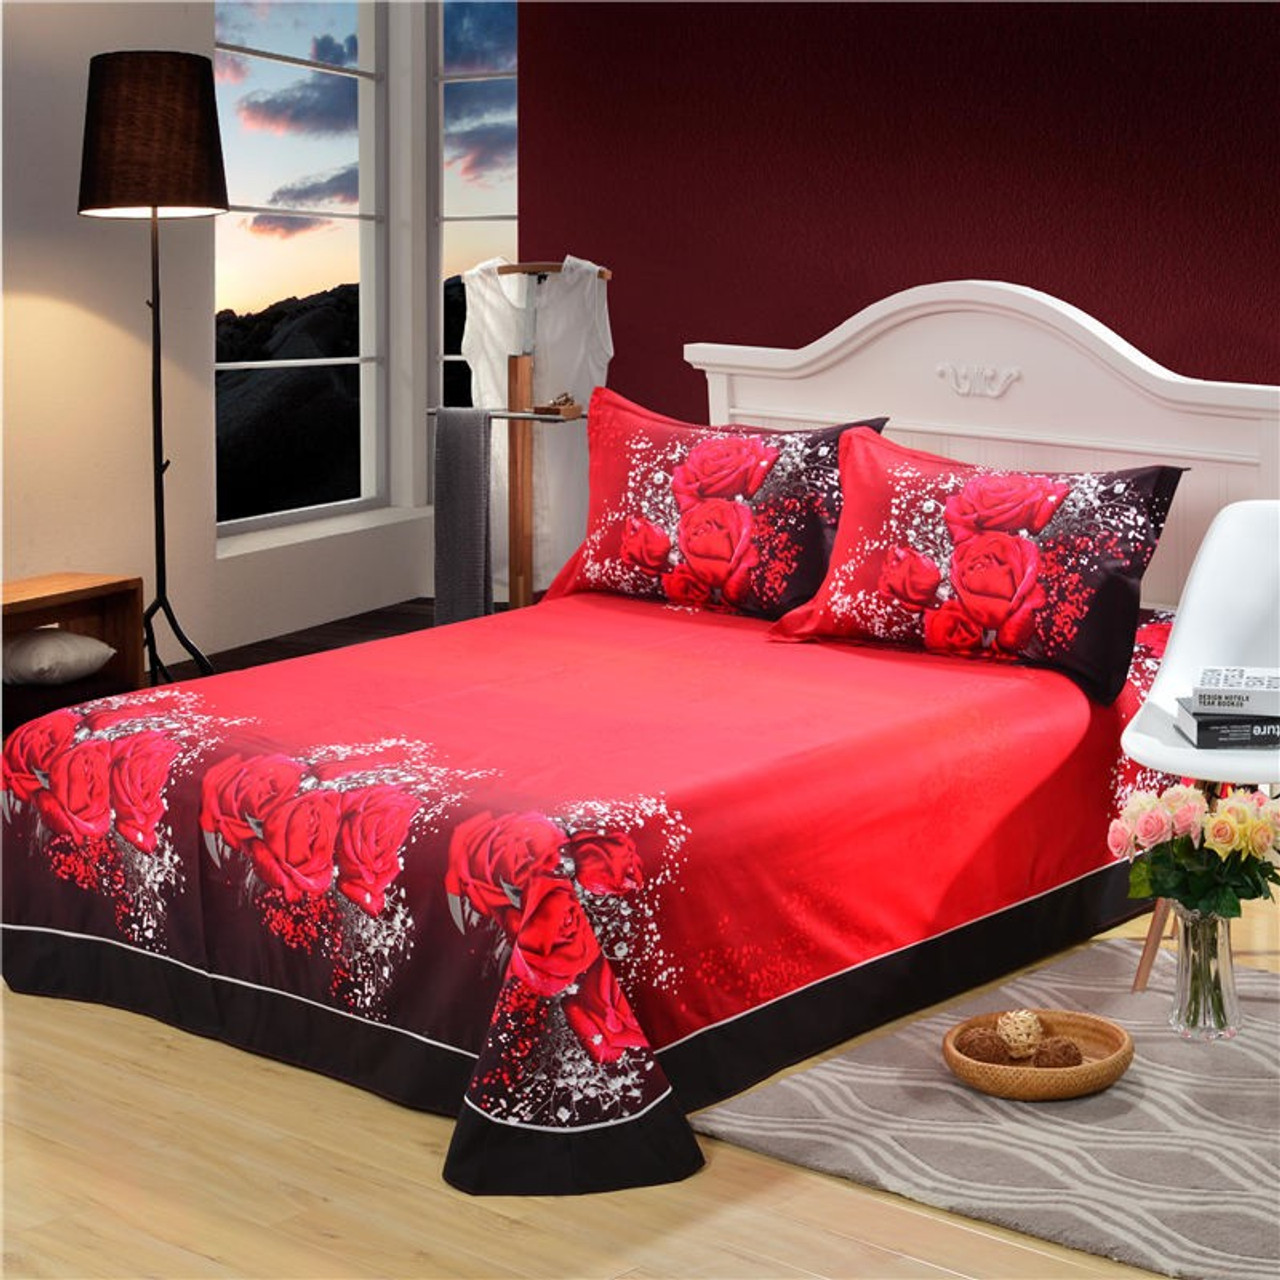 100 Cotton Marilyn Monroe Rose 3d Bedding Sets Queen Size For